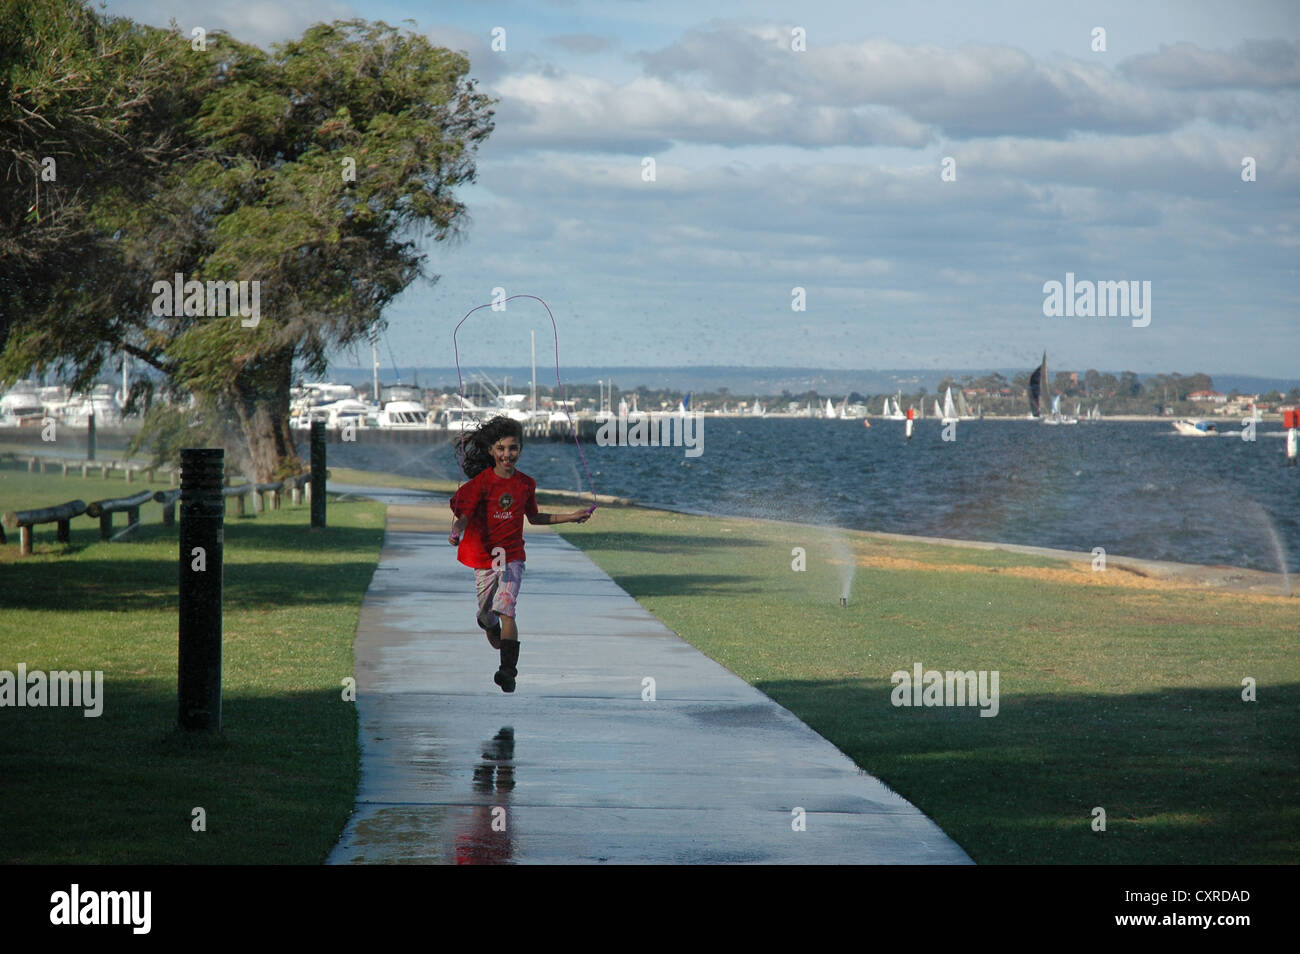 Girl laughing skipping through heavy irrigation shower haze and strong breeze. Swan River, Perth Australia. Stock Photo